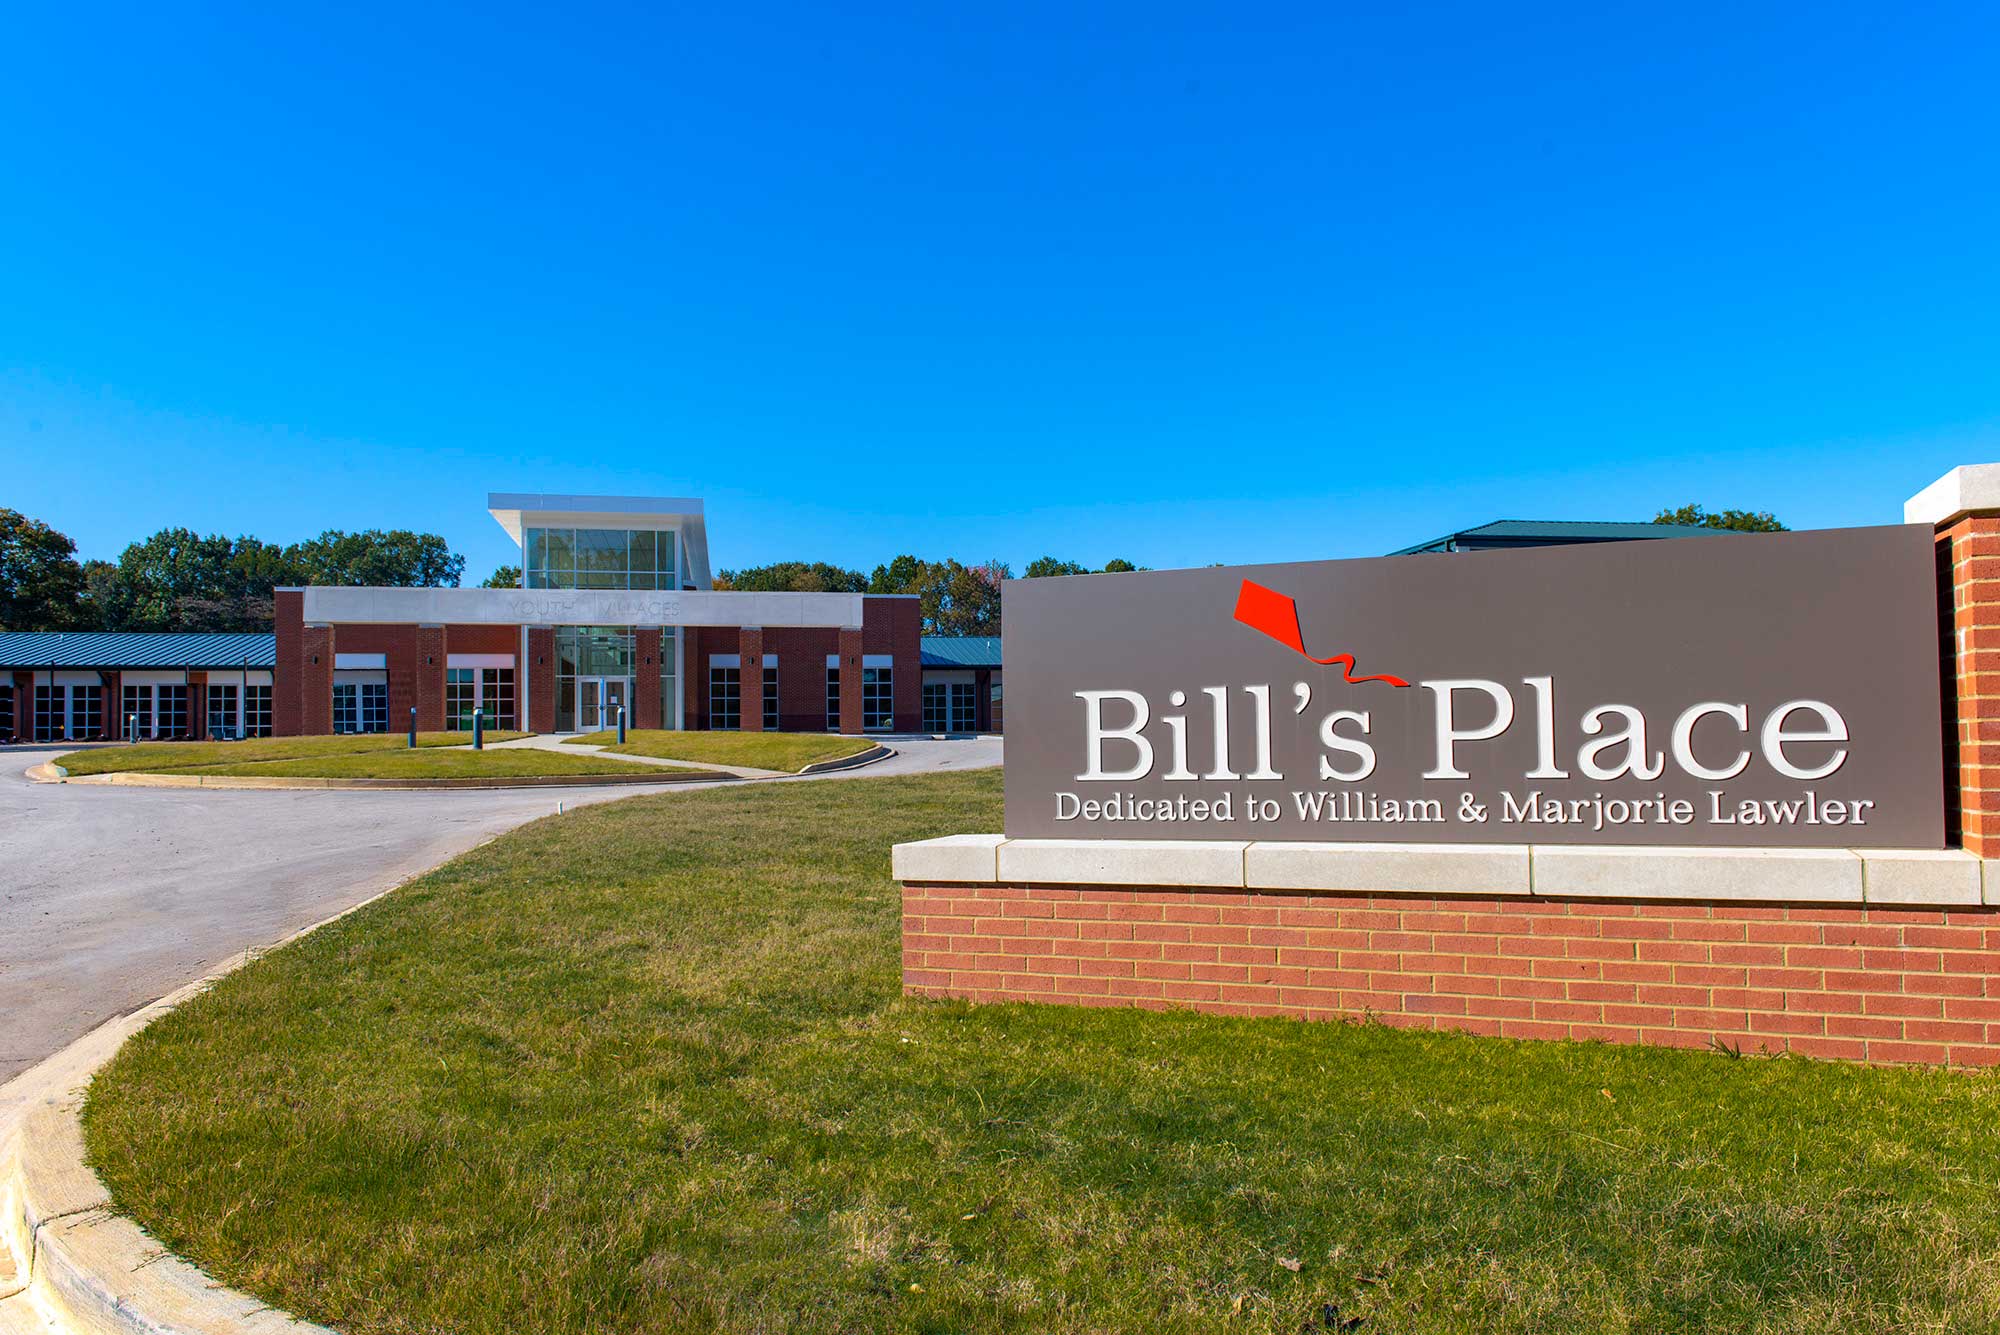 Bill’s Place bringing 200 jobs to Memphis area